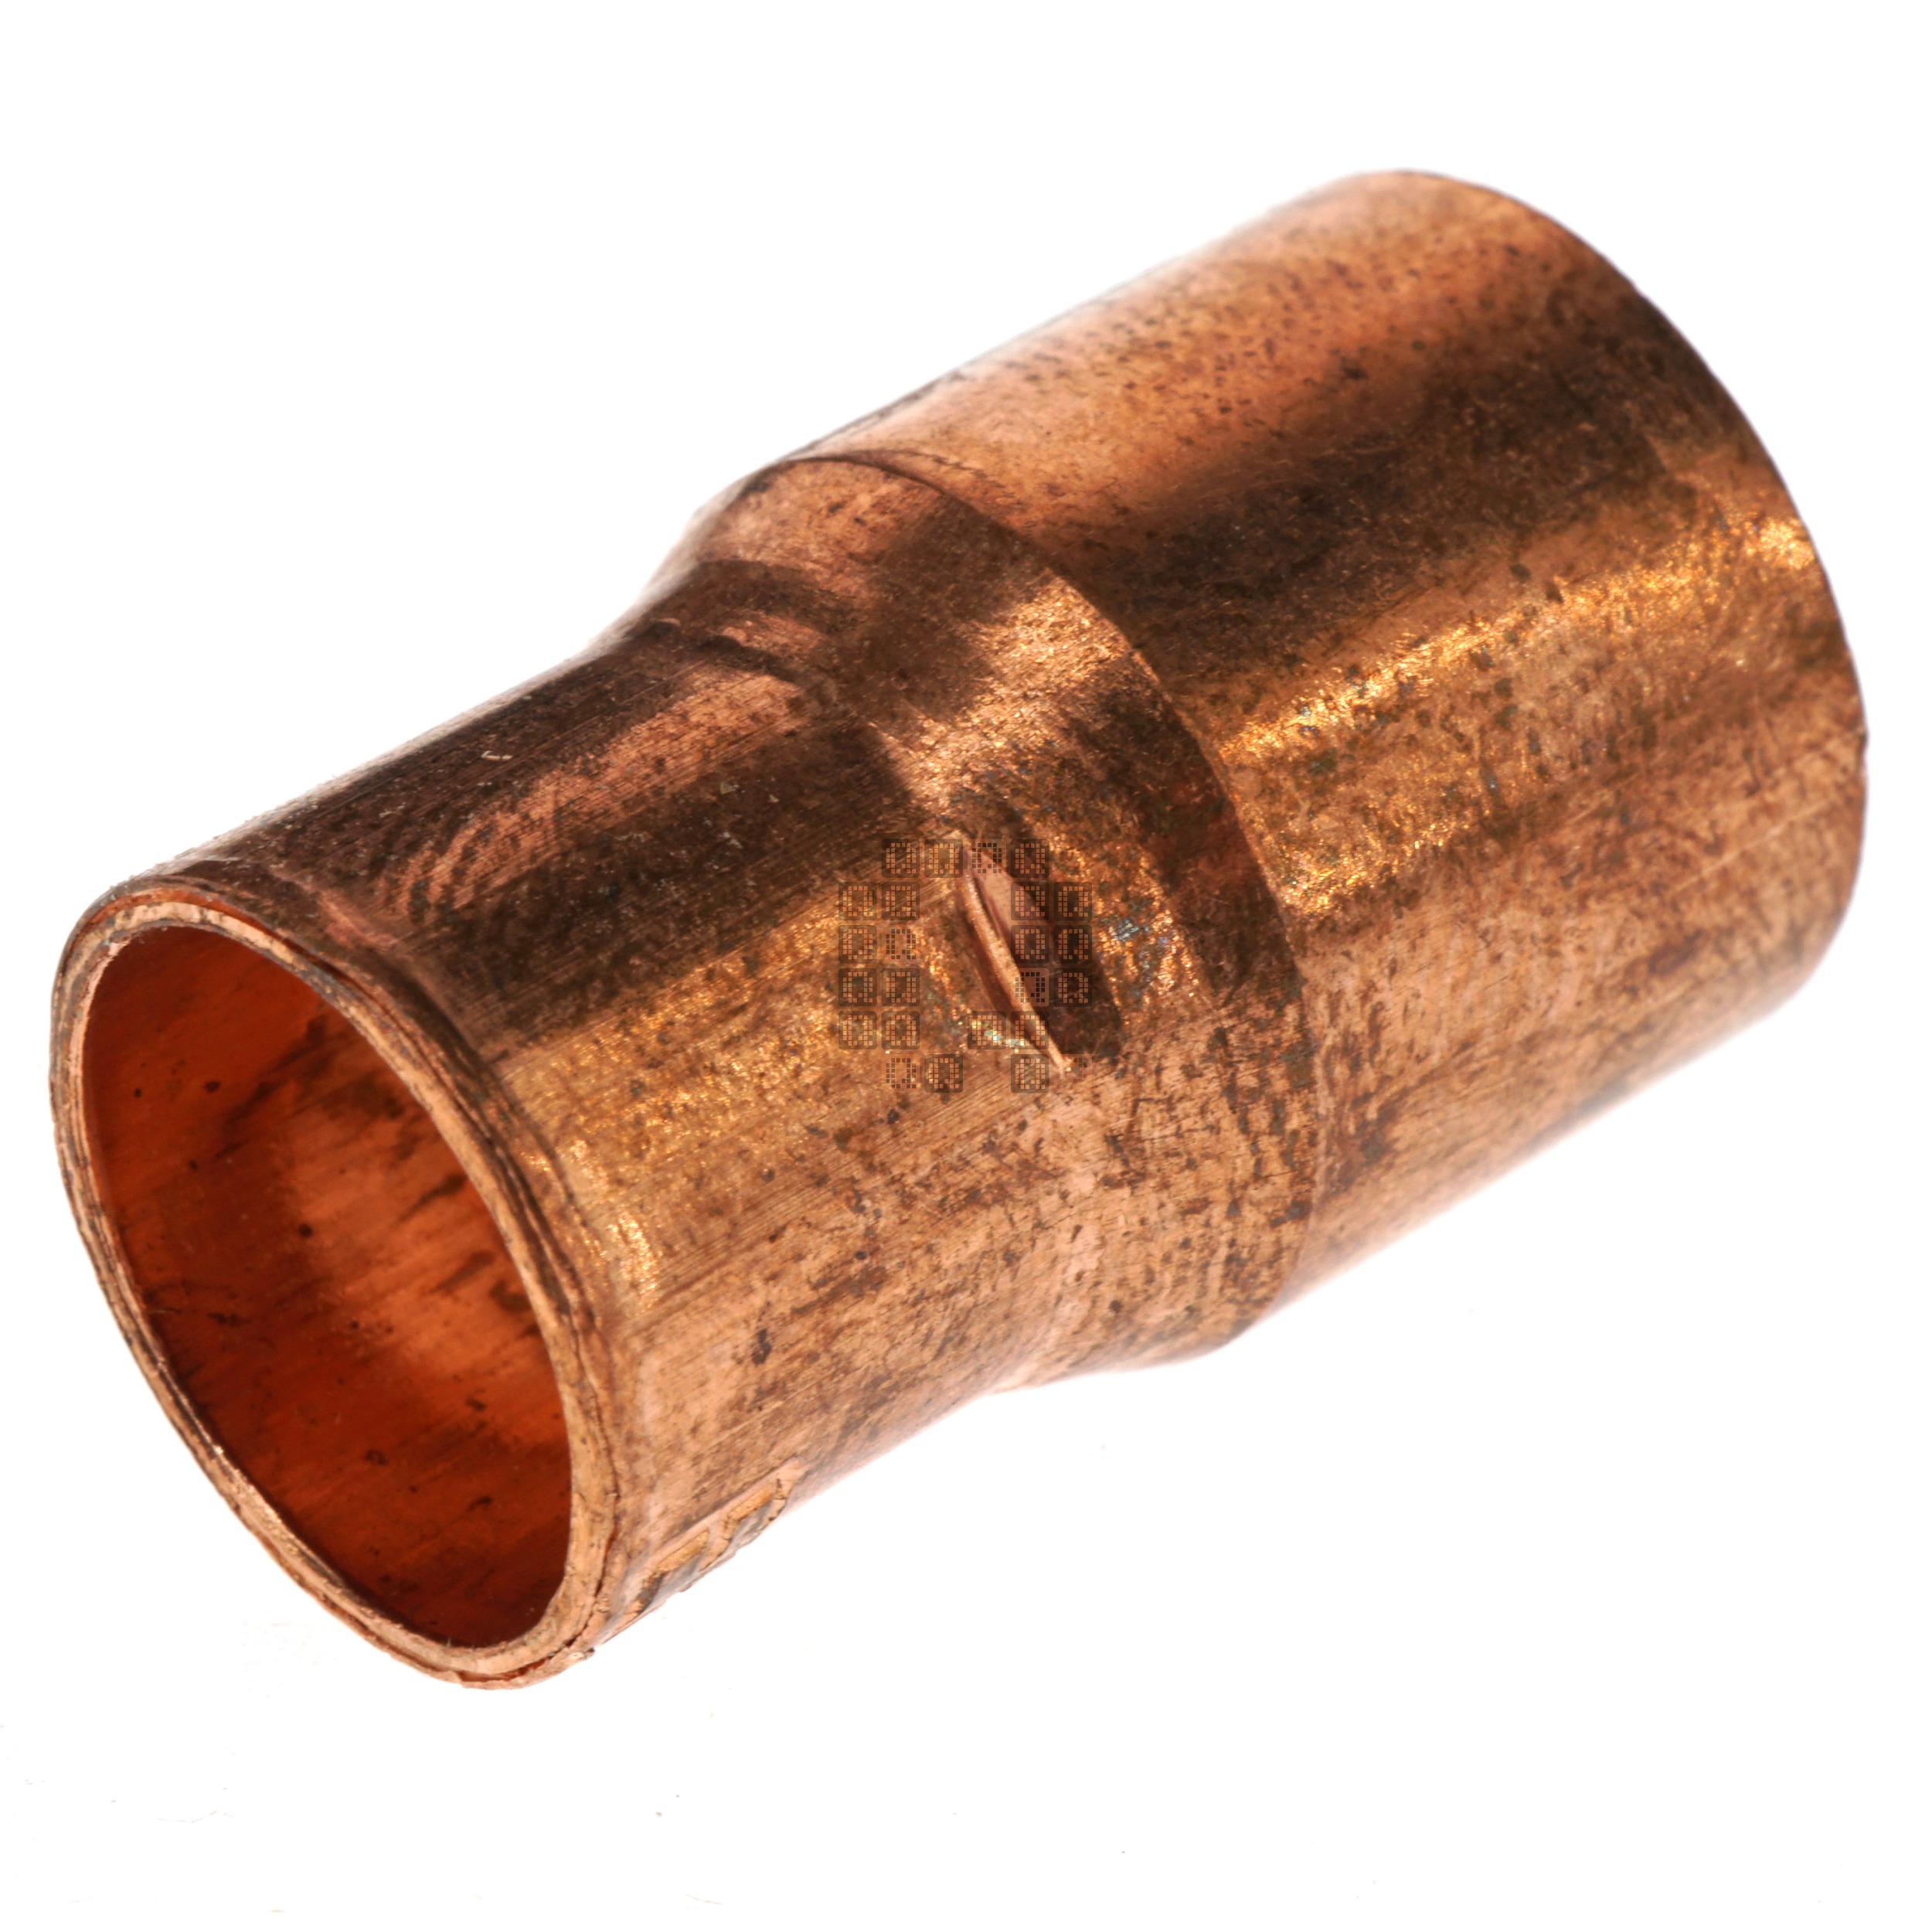 EPC 30696 1/2" x 3/8" Copper Sweat Reducing Pipe Coupling with Stop, 101R